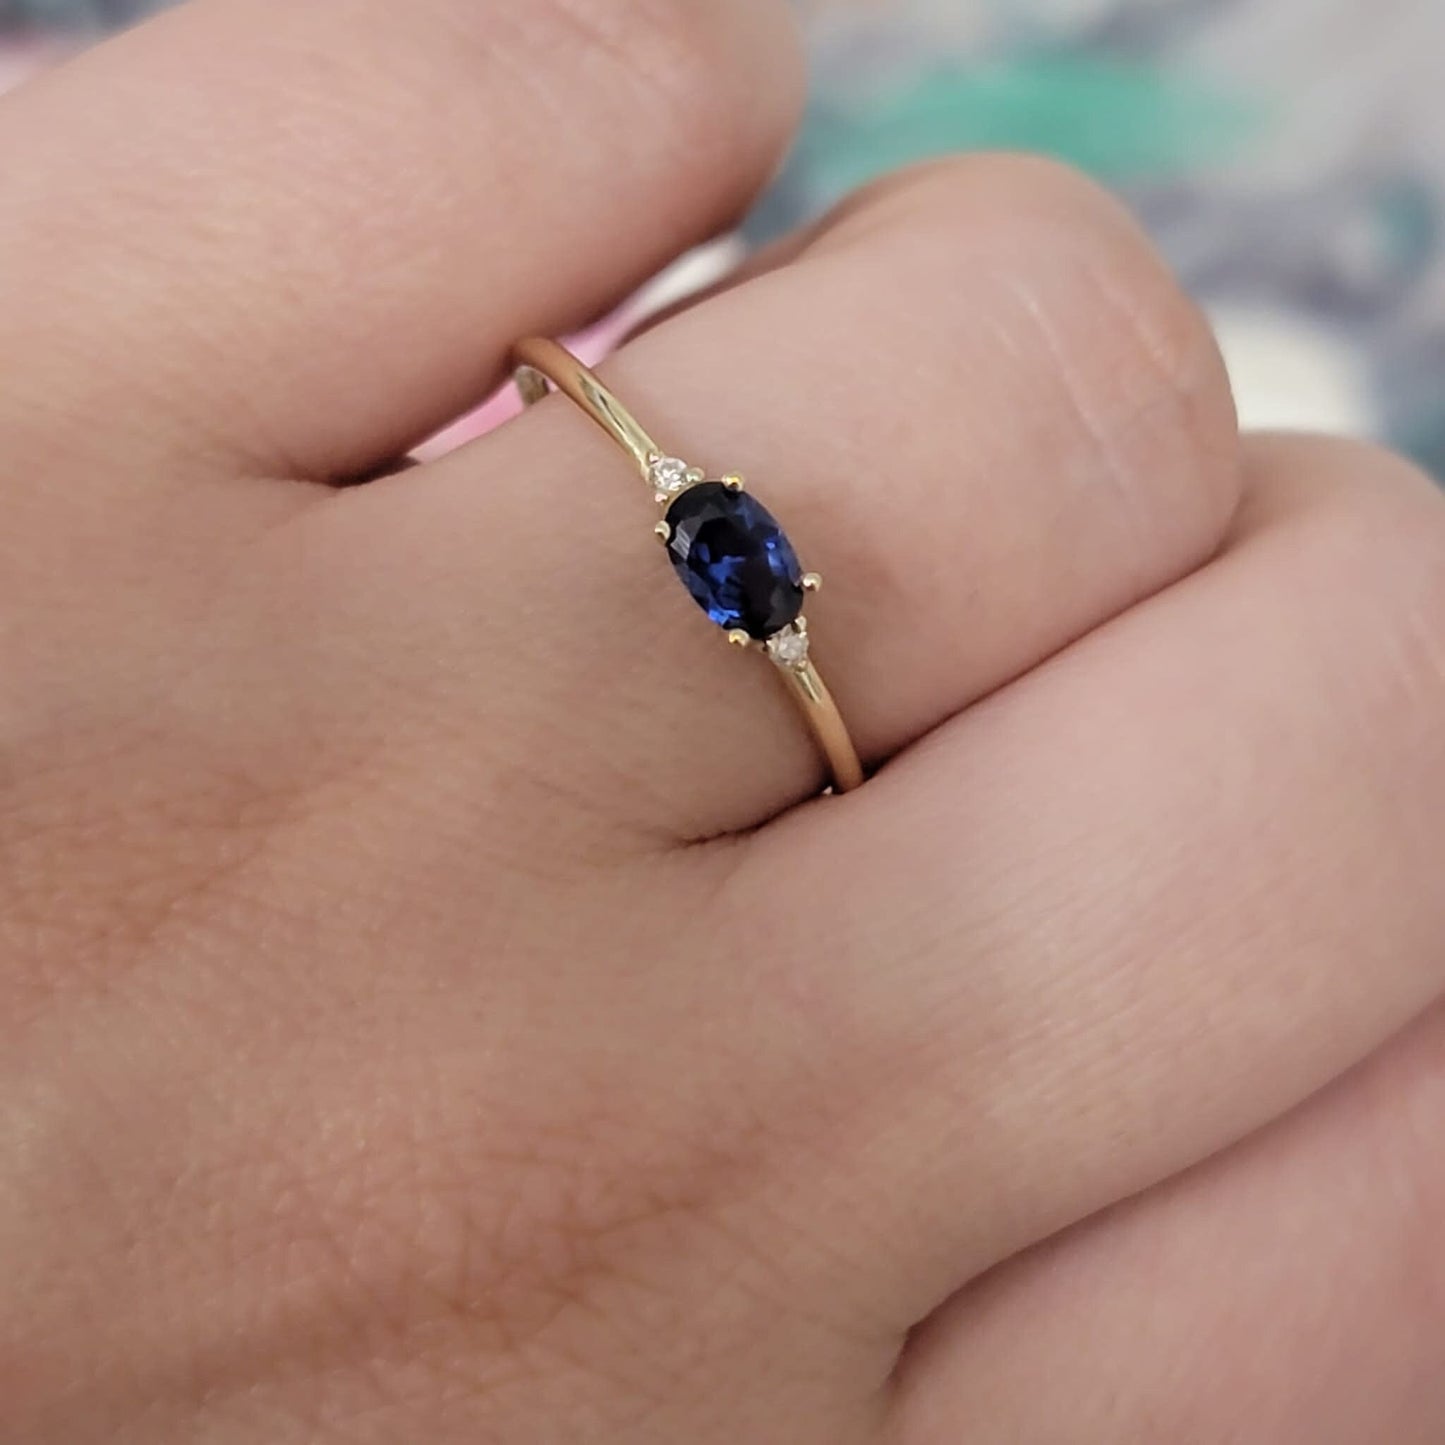 Oval Cut Blue Sapphire And Diamond Engagement Ring, 14K Vintage Solitaire Sapphire Ring, Three Stone Engagement Ring, Anniversary Gift,